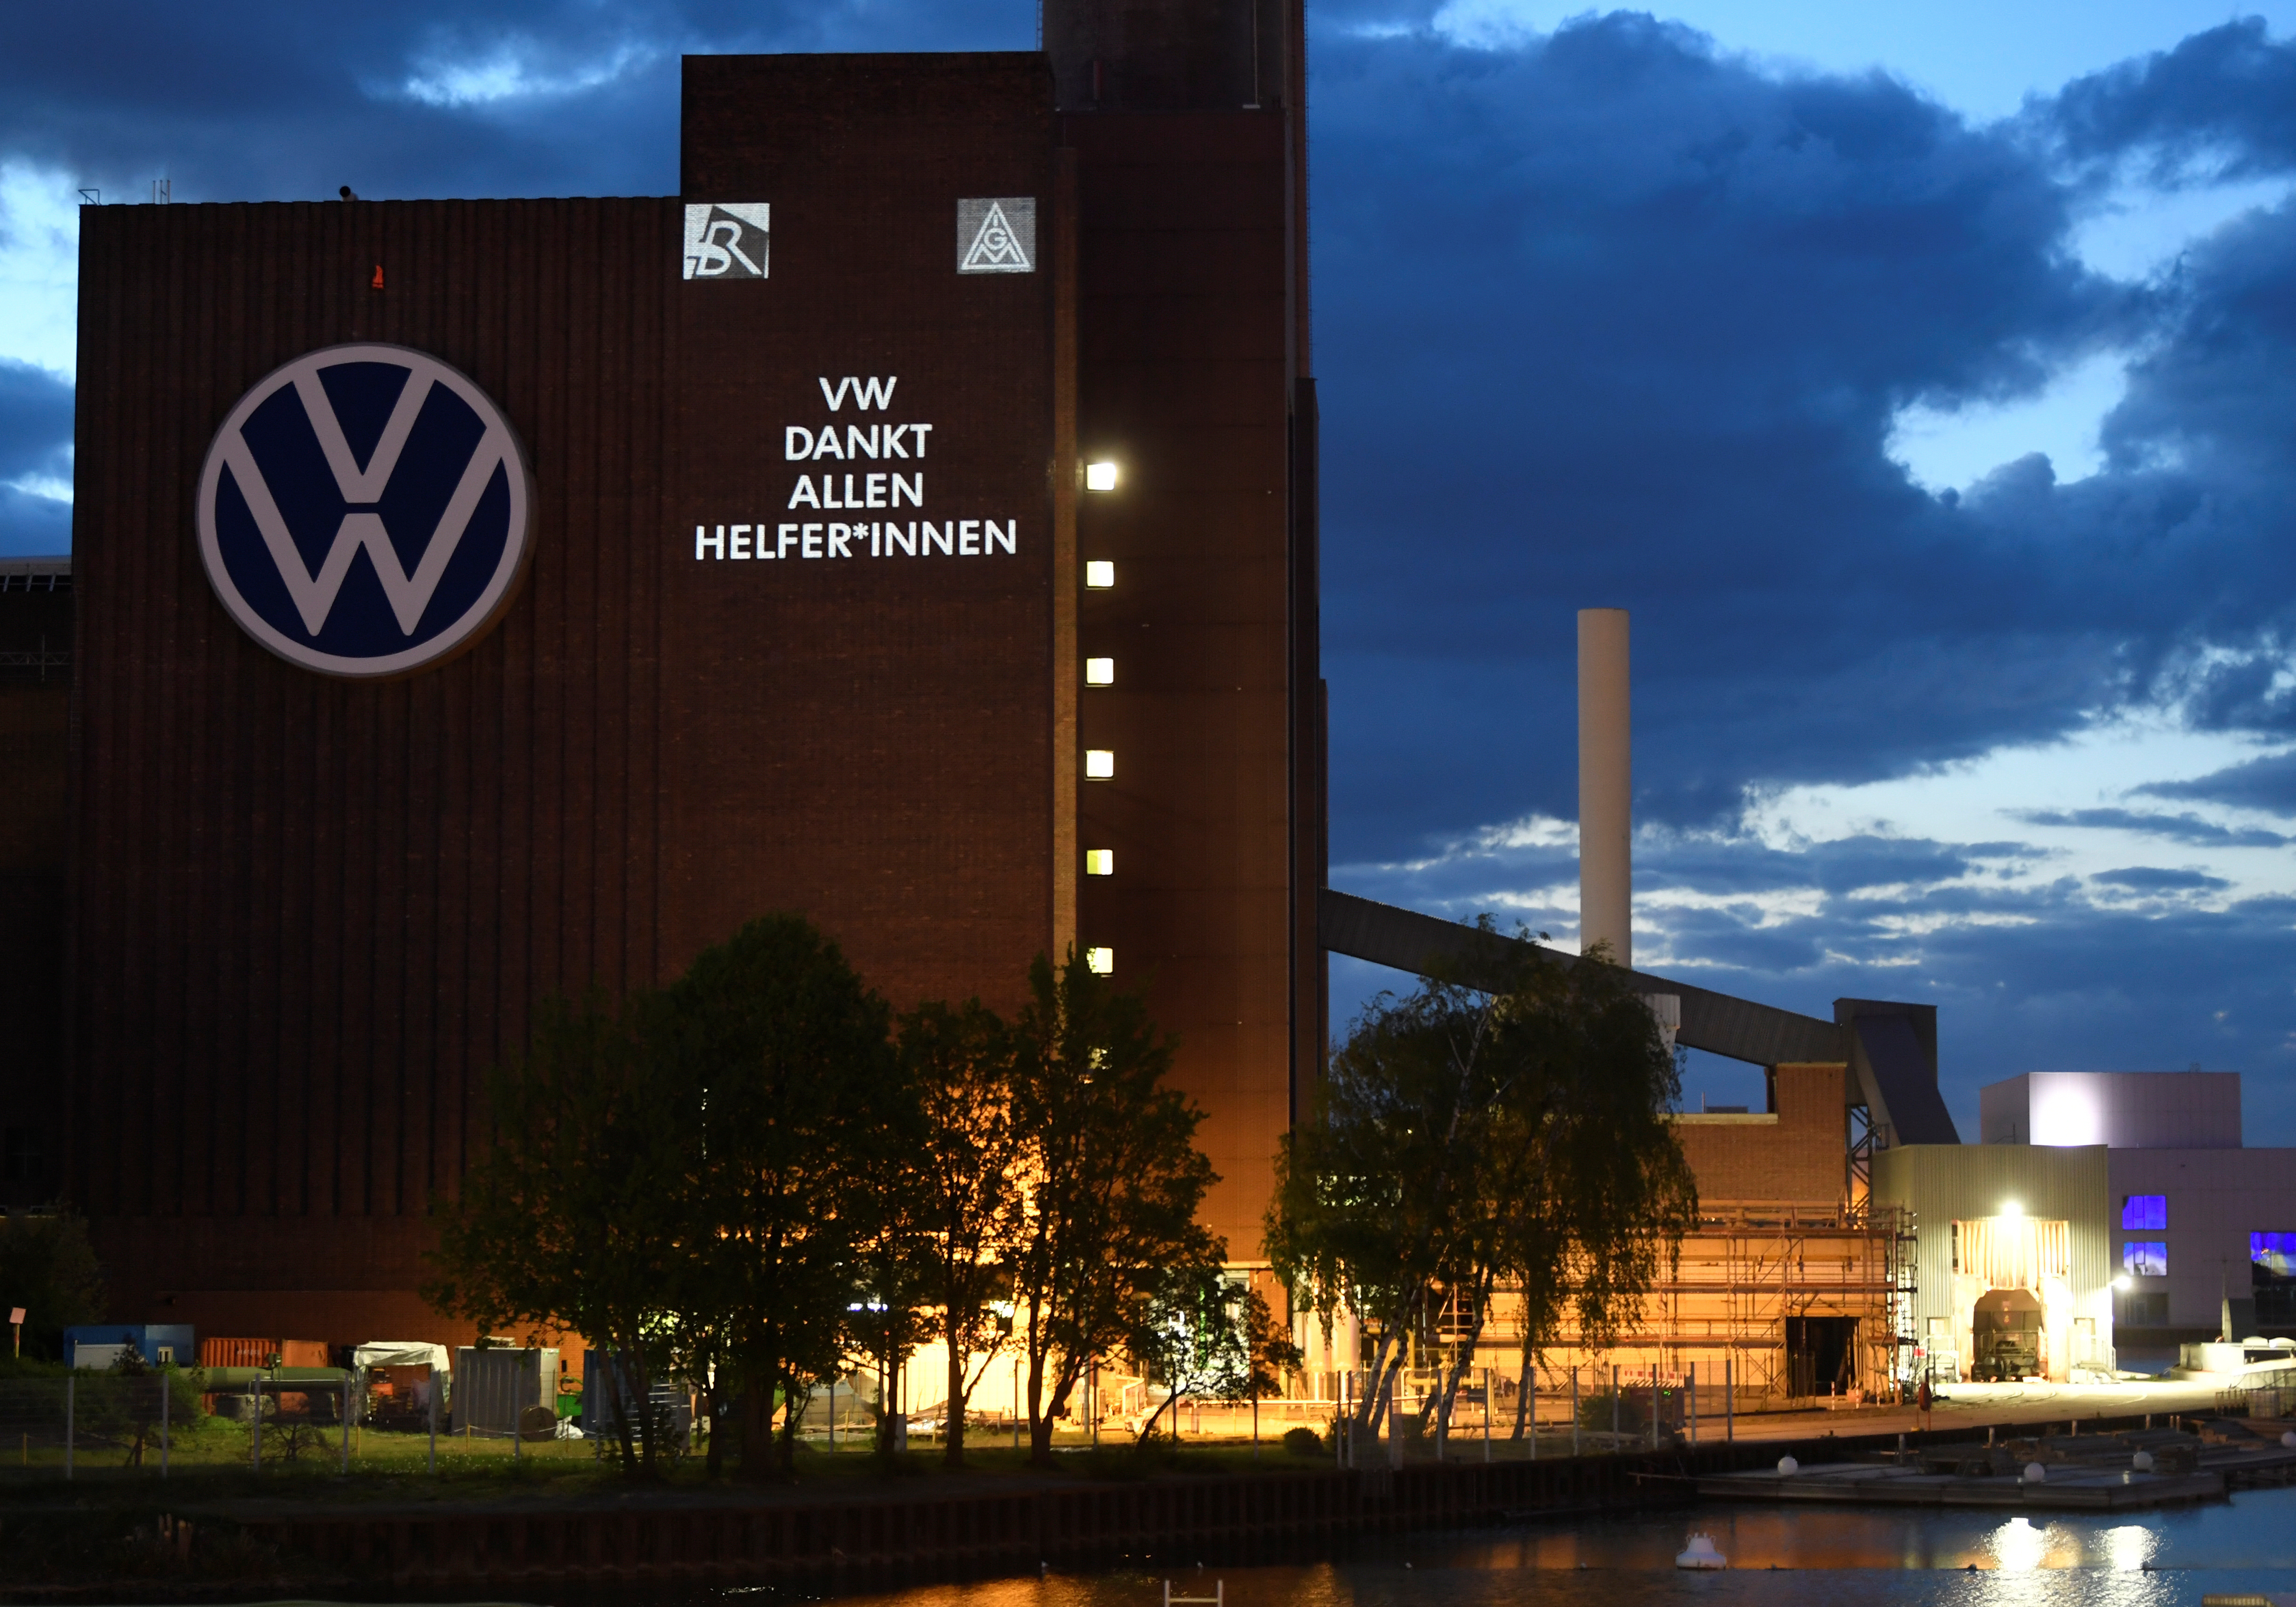 A slogan reading "VW thanks all Helpers" is displayed on a building at Volkswagen's headquarters to celebrate the plant's re-opening during the spread of the coronavirus disease (COVID-19) in Wolfsburg